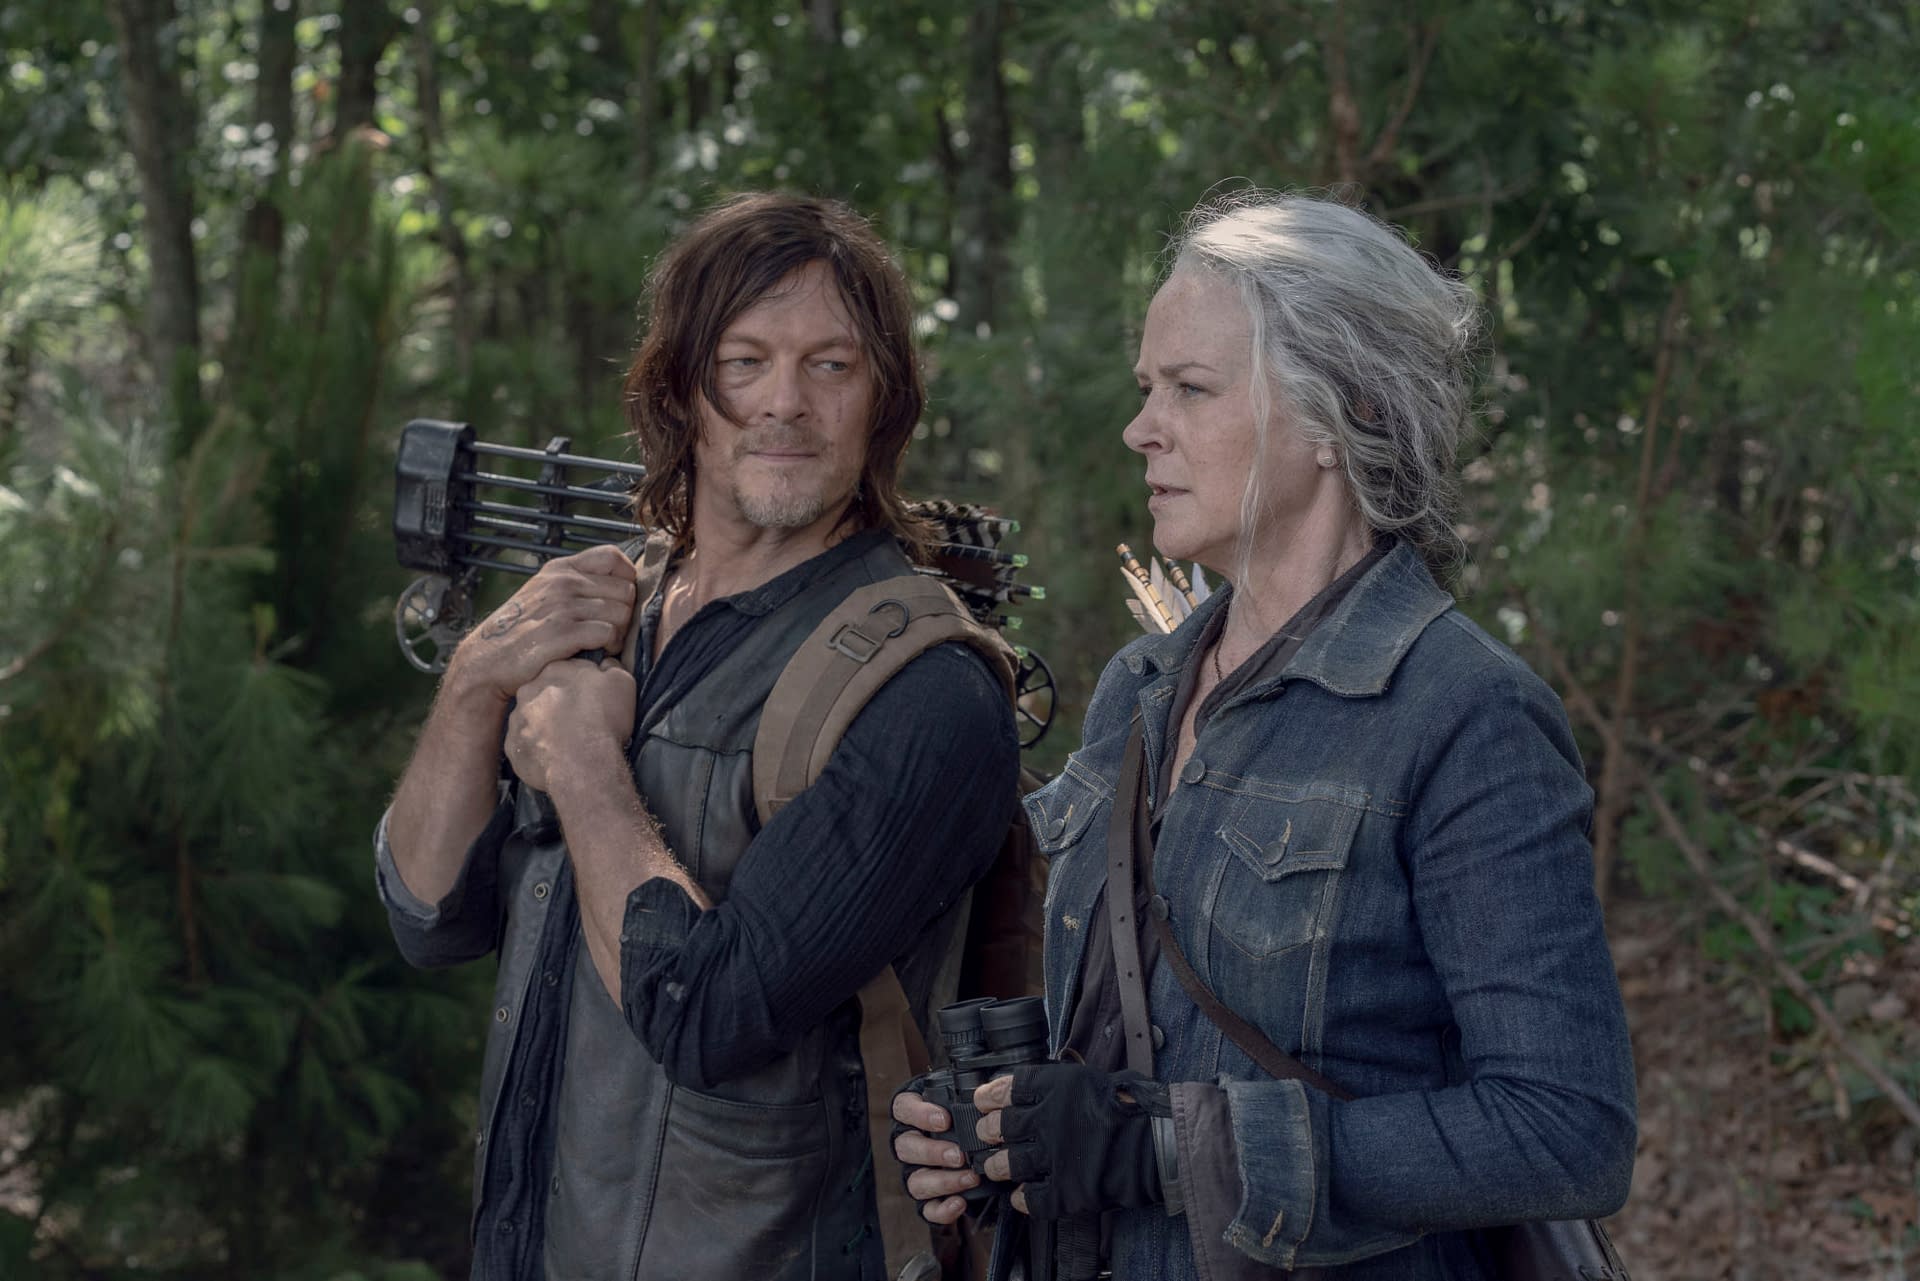 "The Walking Dead" Season 10 "Bonds": So What's Carol REALLY Up To? Daryl Wants to Know [PREVIEW]